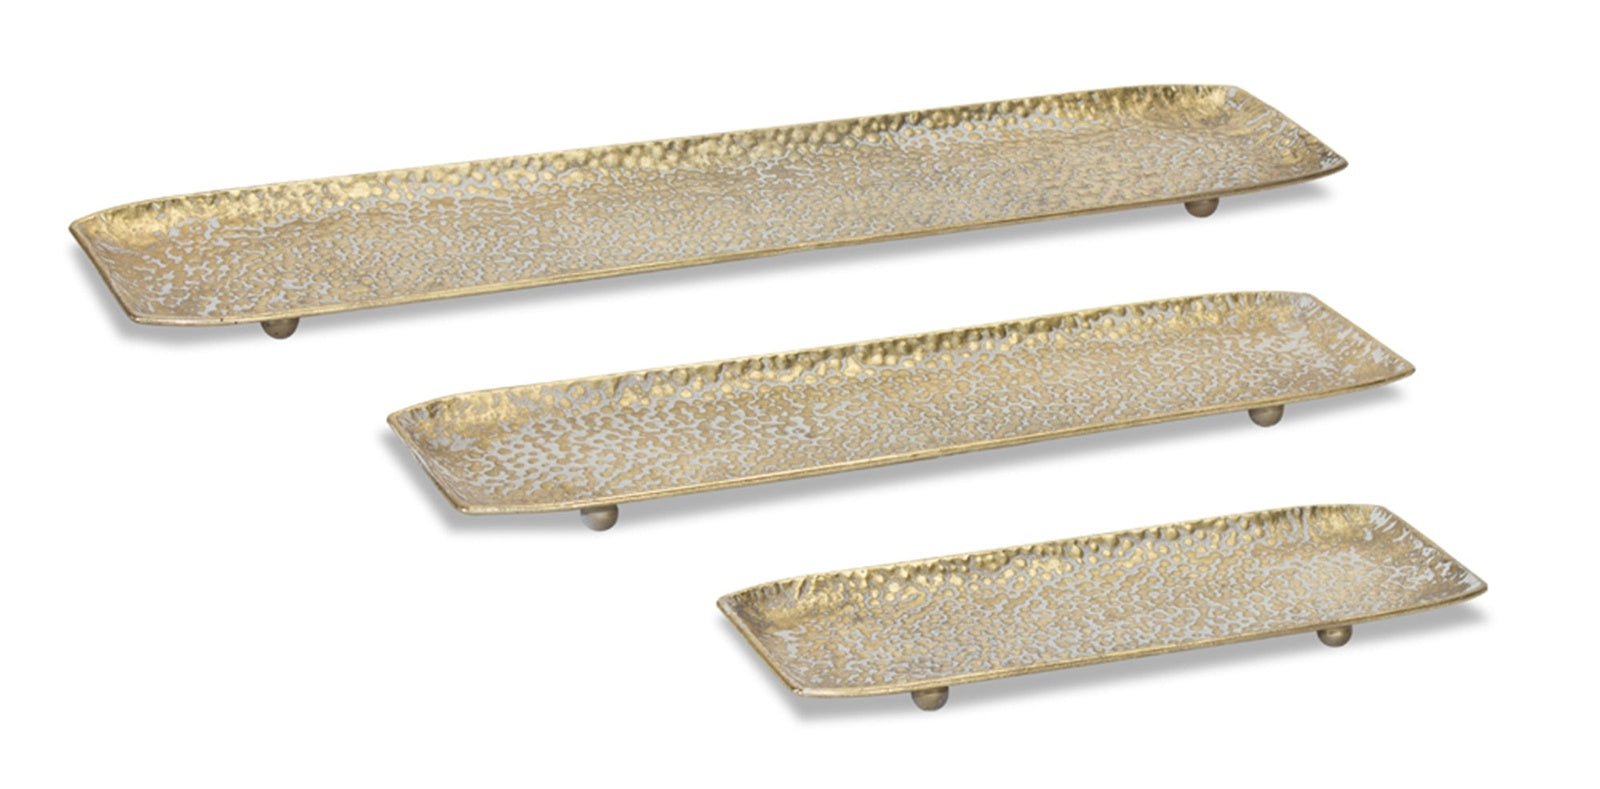 Hammered Metal Tray with Washed Finish, Set of 3 - Pier 1